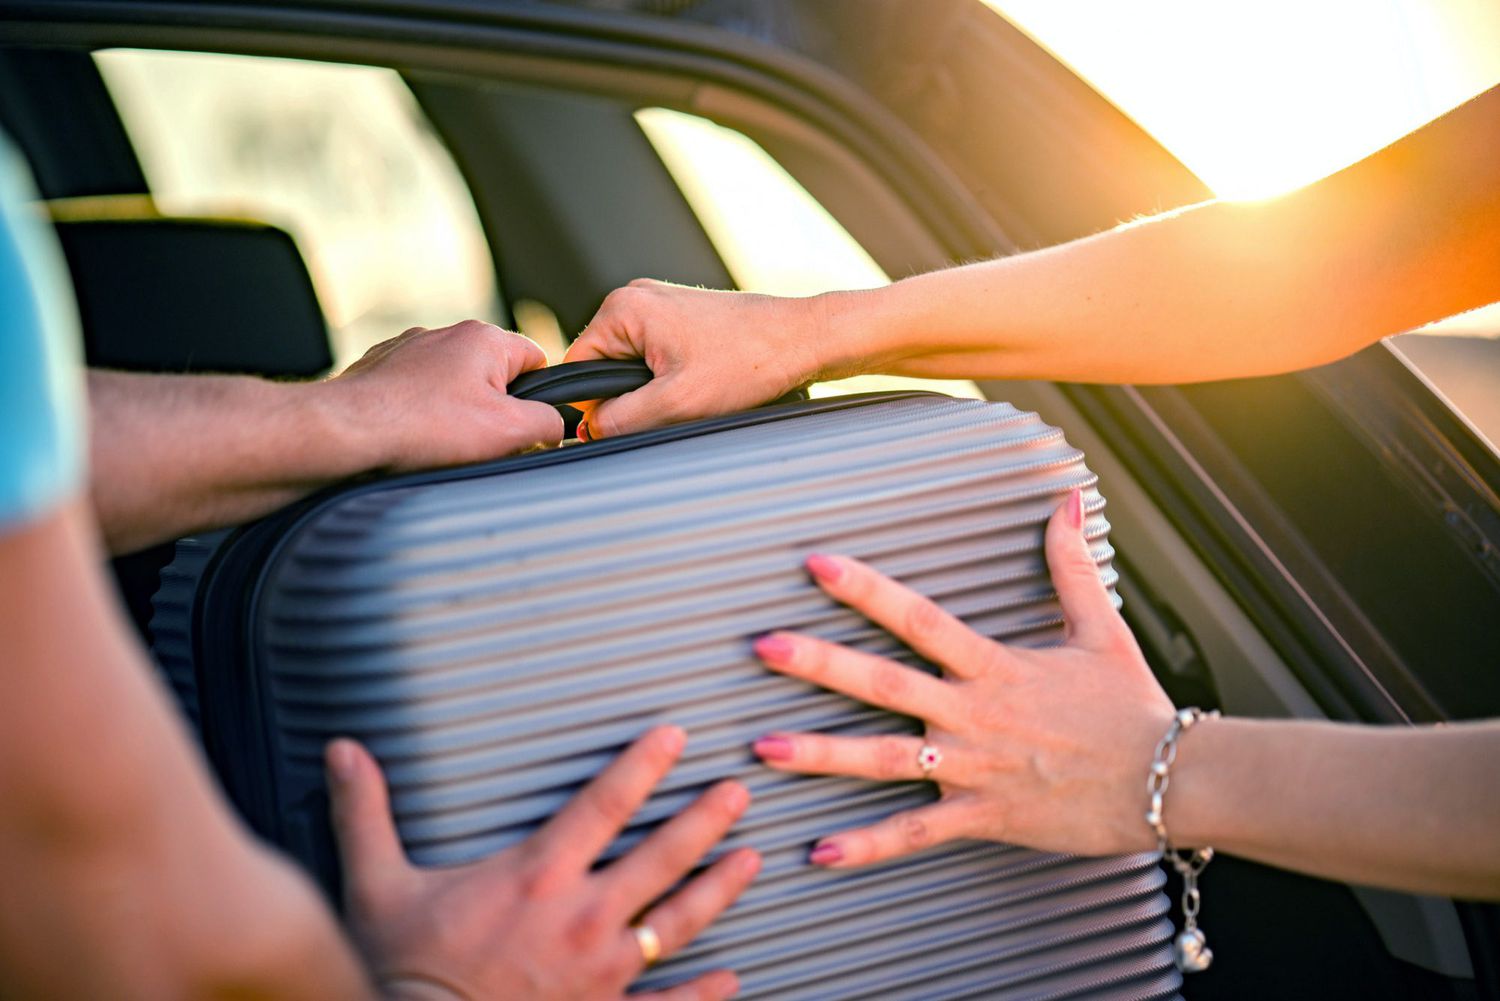 An image of a couple putting luggage in their car.